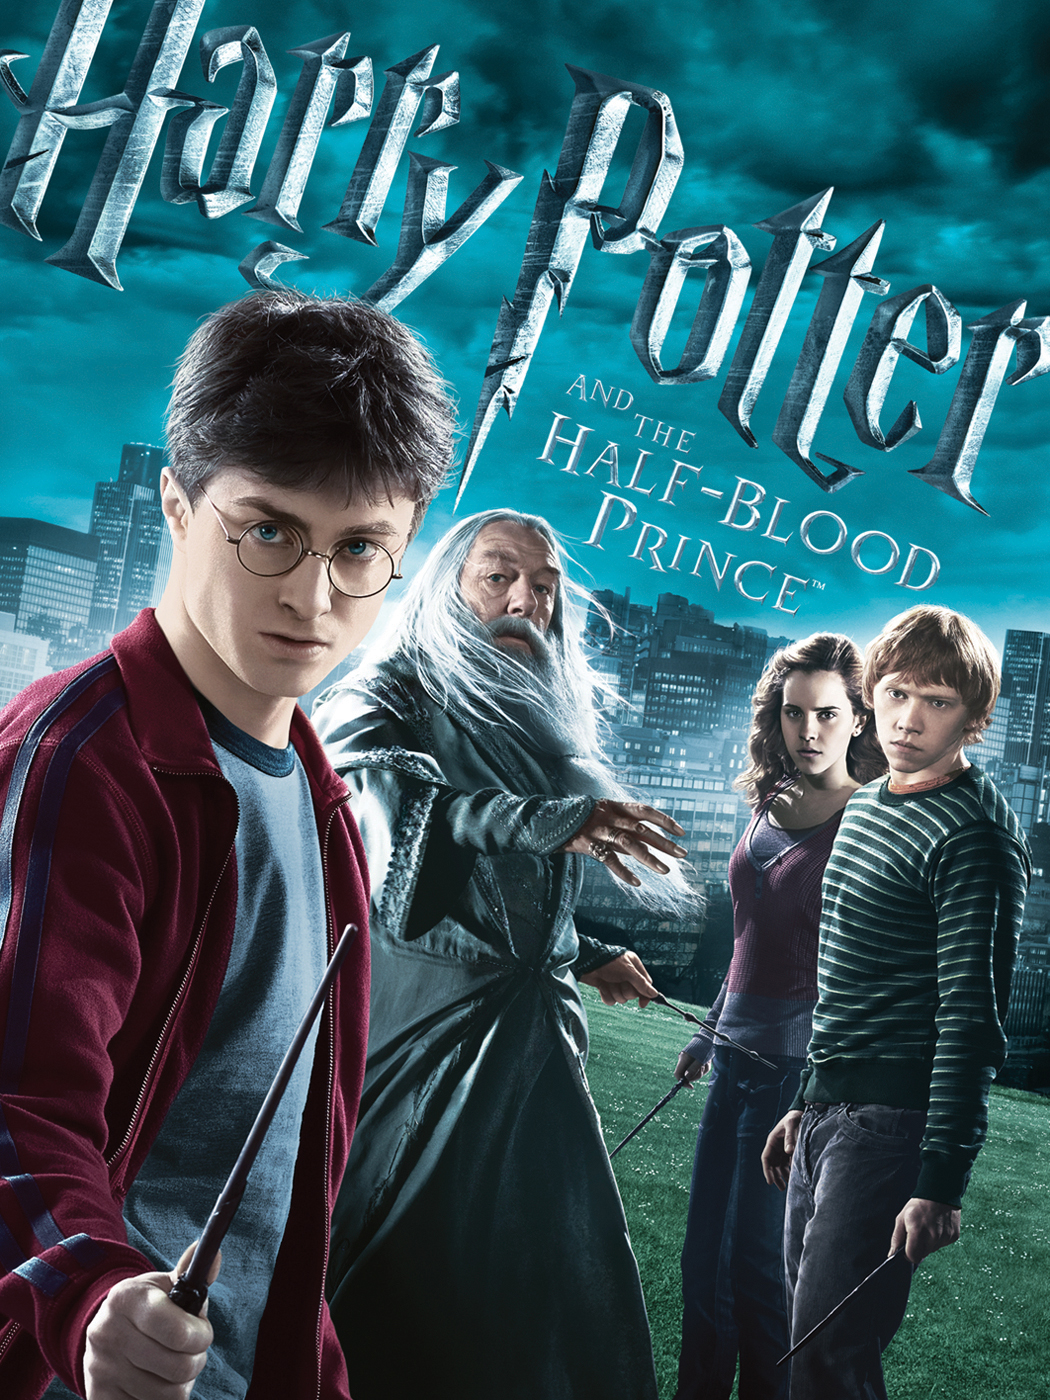 Harry Potter And The Half Blood Prince 09 Movie Dvd 1080p In Hindi And English Dual Audio Harry Potter Movie 6 Buy Online At Best Prices In Pakistan Daraz Pk